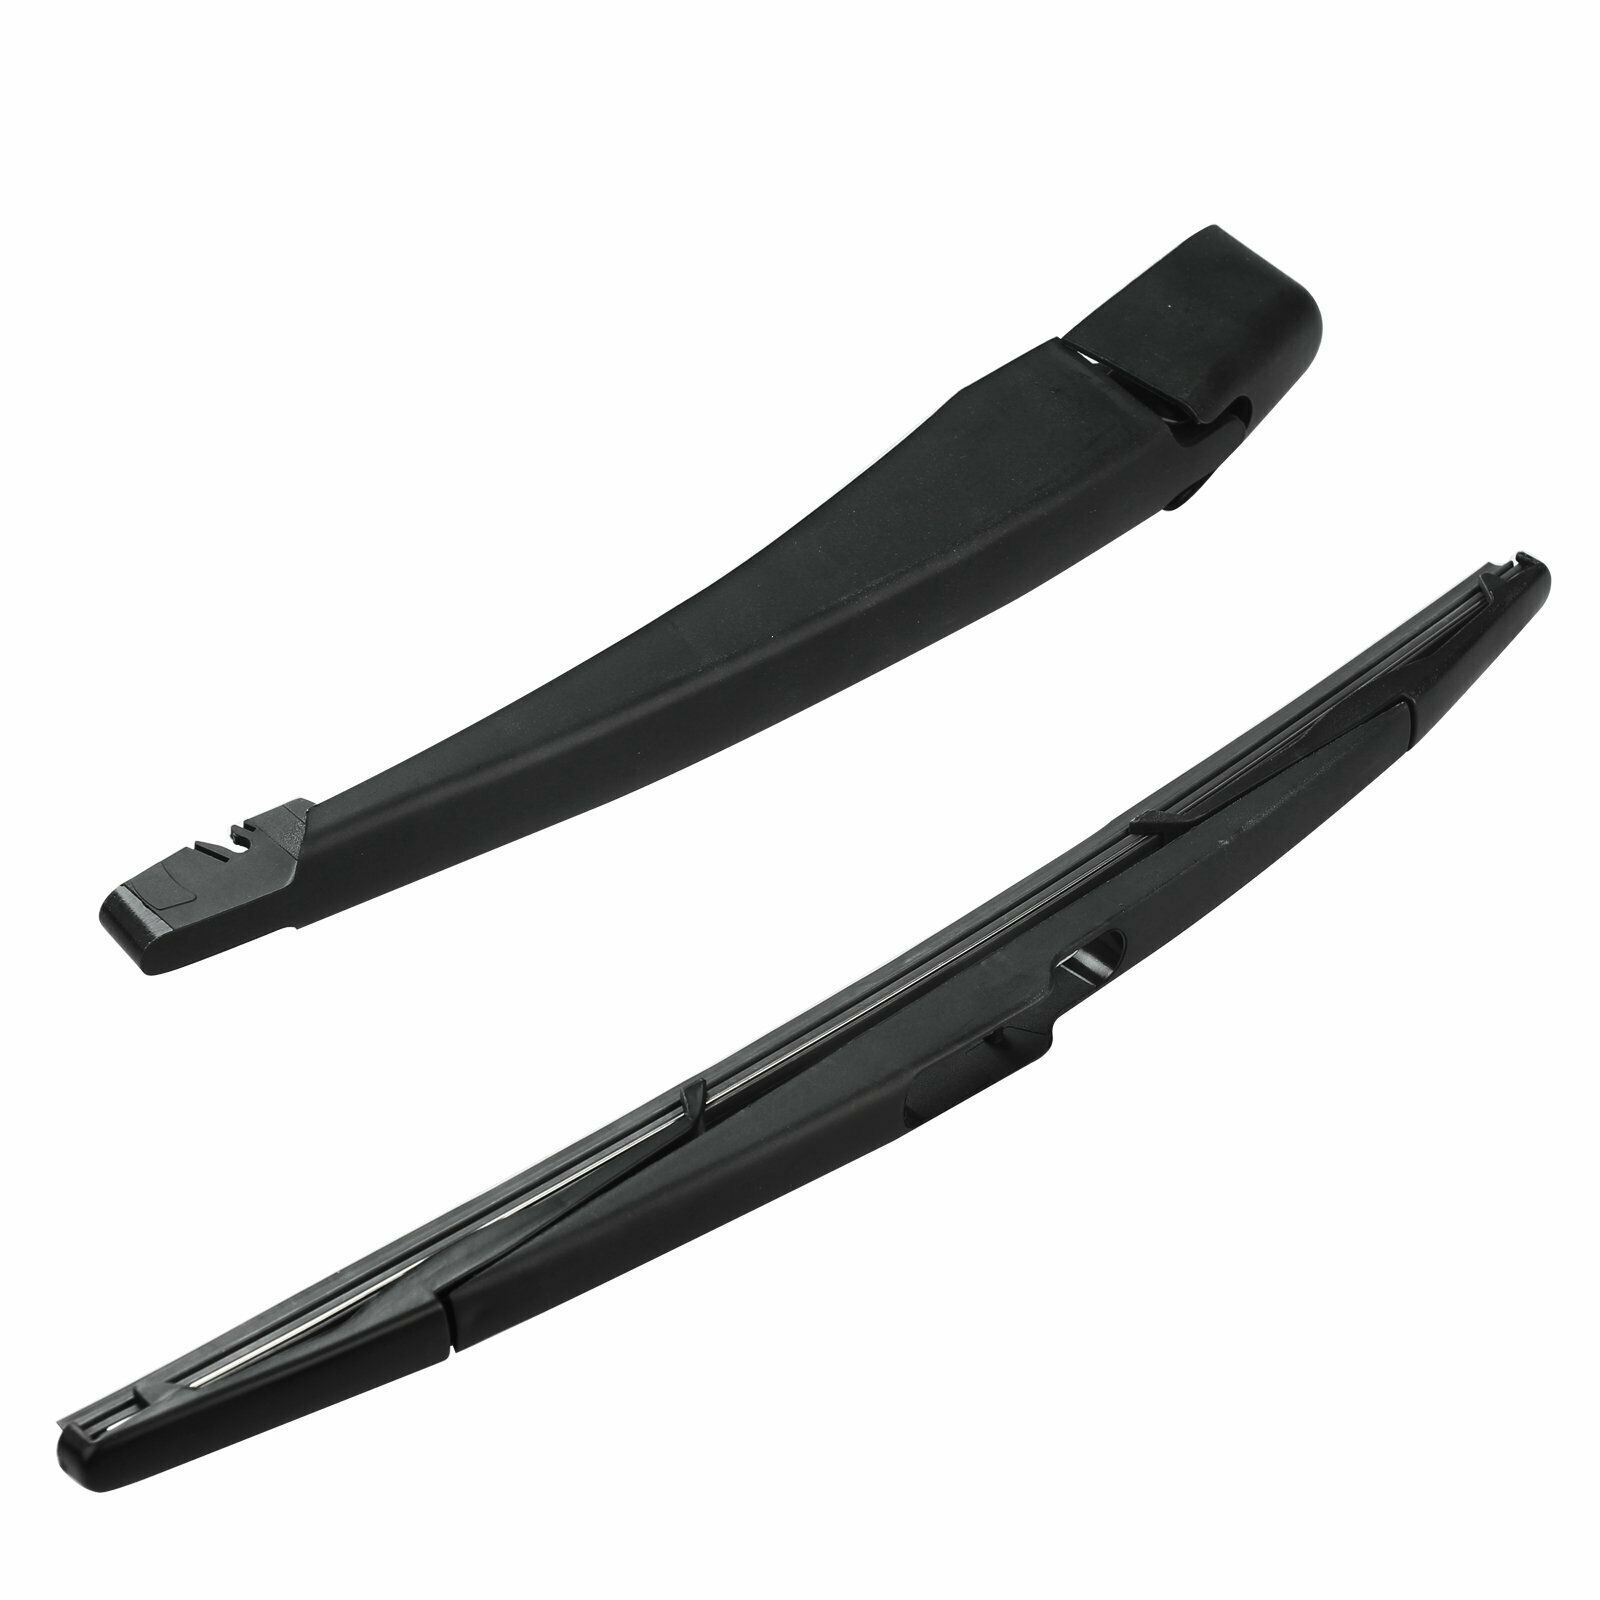 Rear Wiper Arm + Blade Set Fits Dodge Caravan Chrysler Town & Country 2008-2009 - Windshield 2012 Town And Country Rear Wiper Blade Size